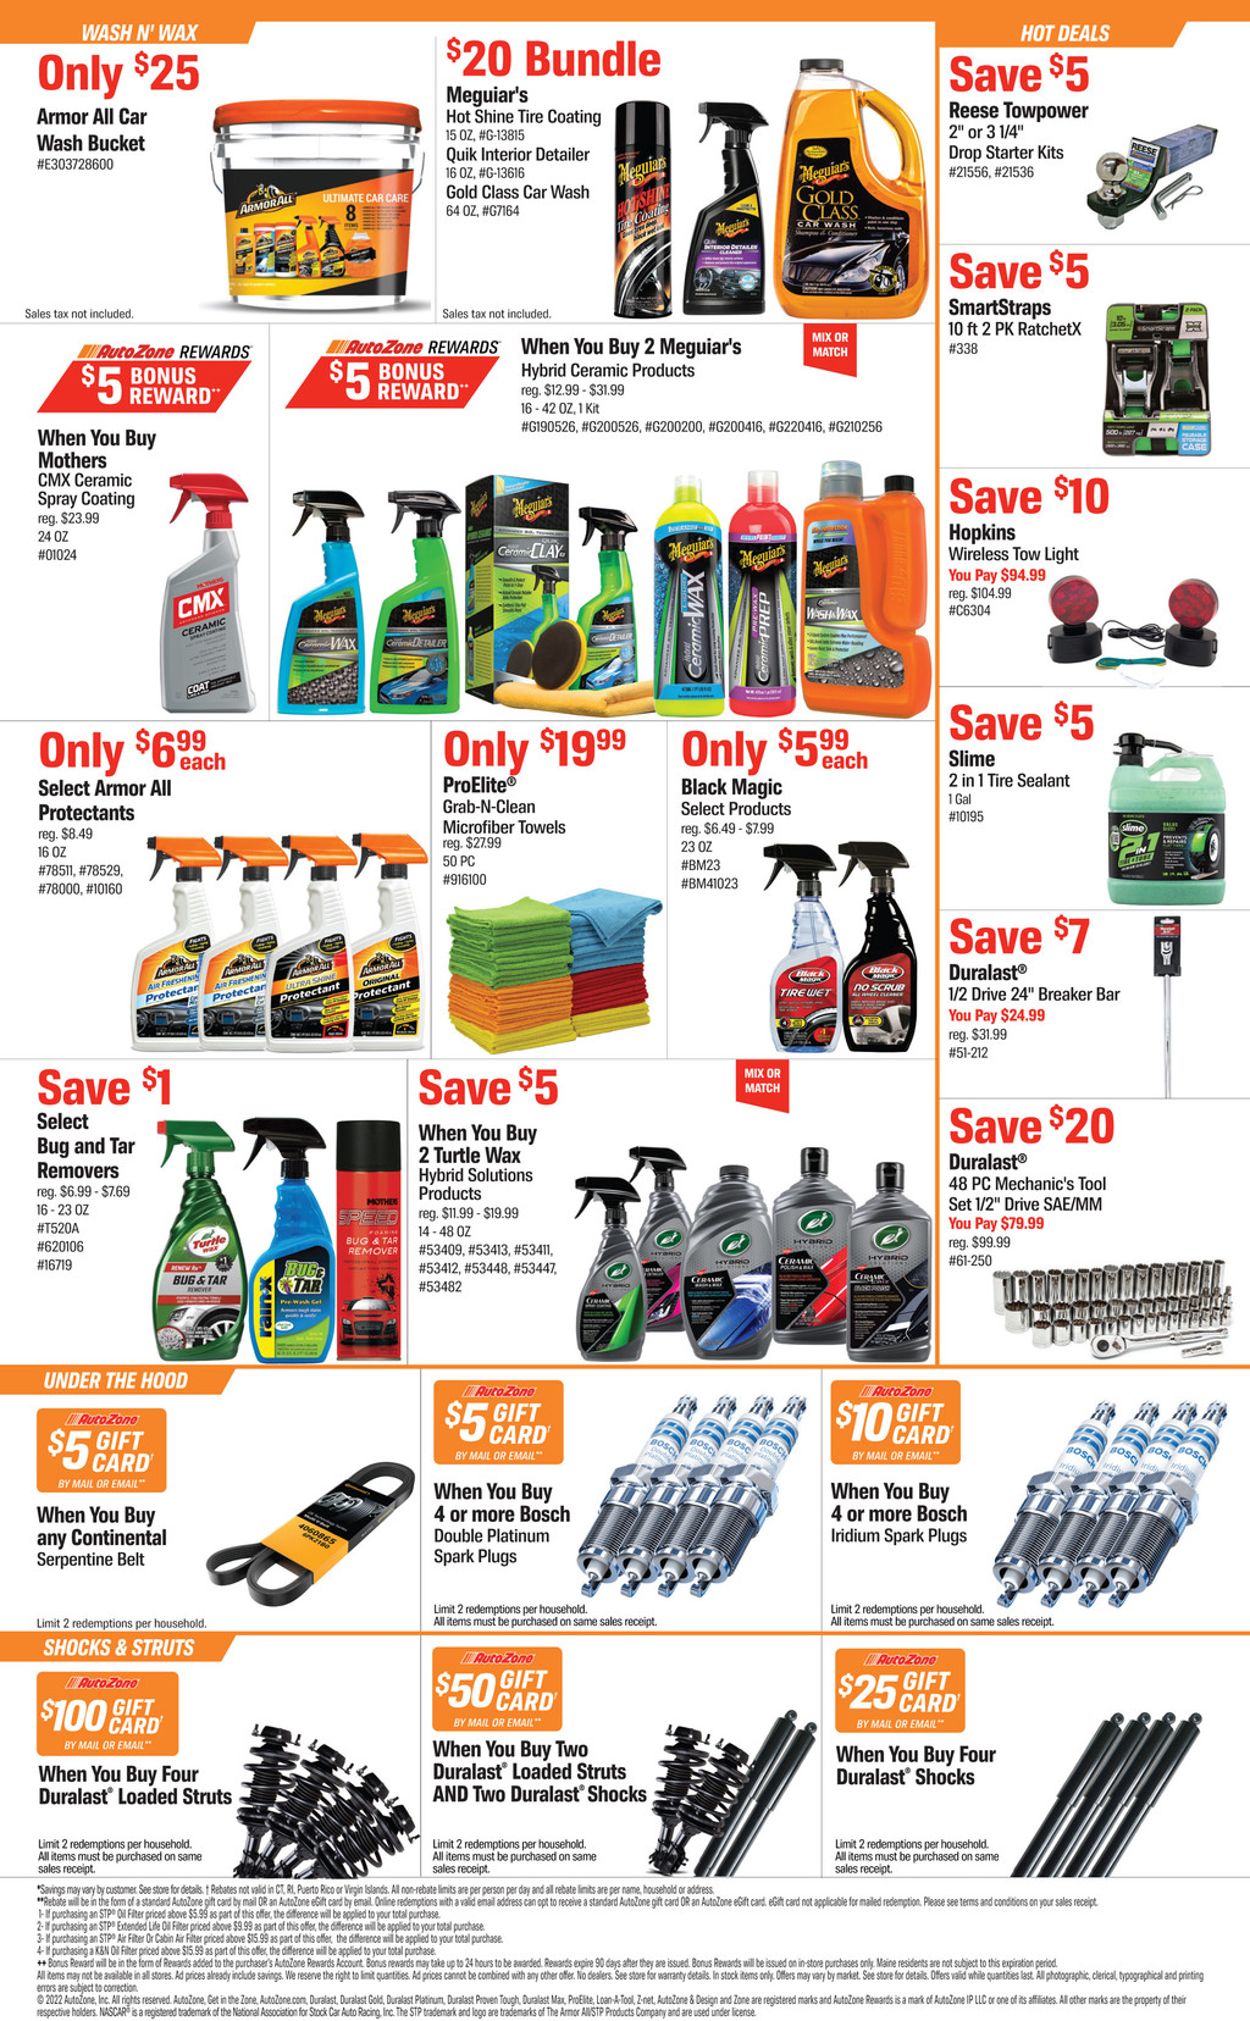 Autozone Ad from 05/03/2022